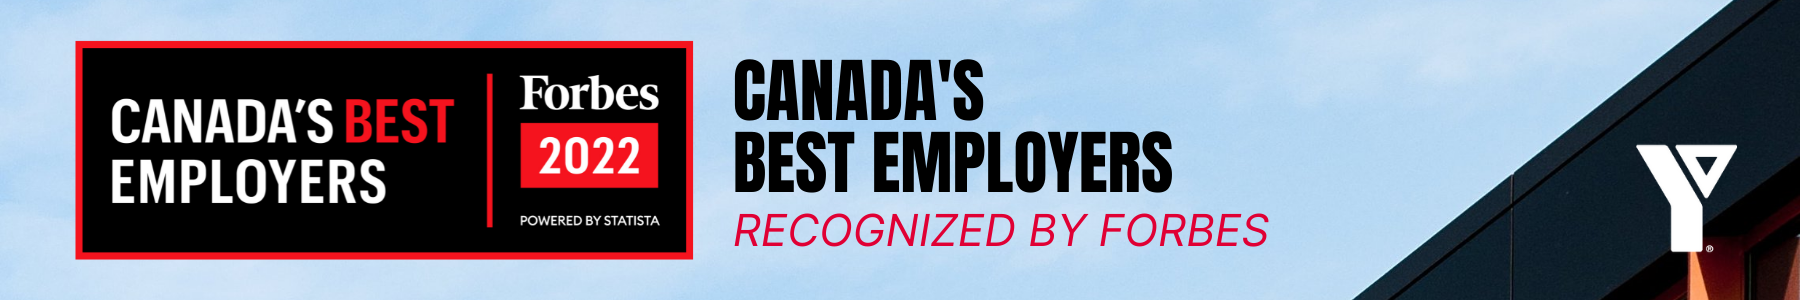 canada's best employers recognized by forbes